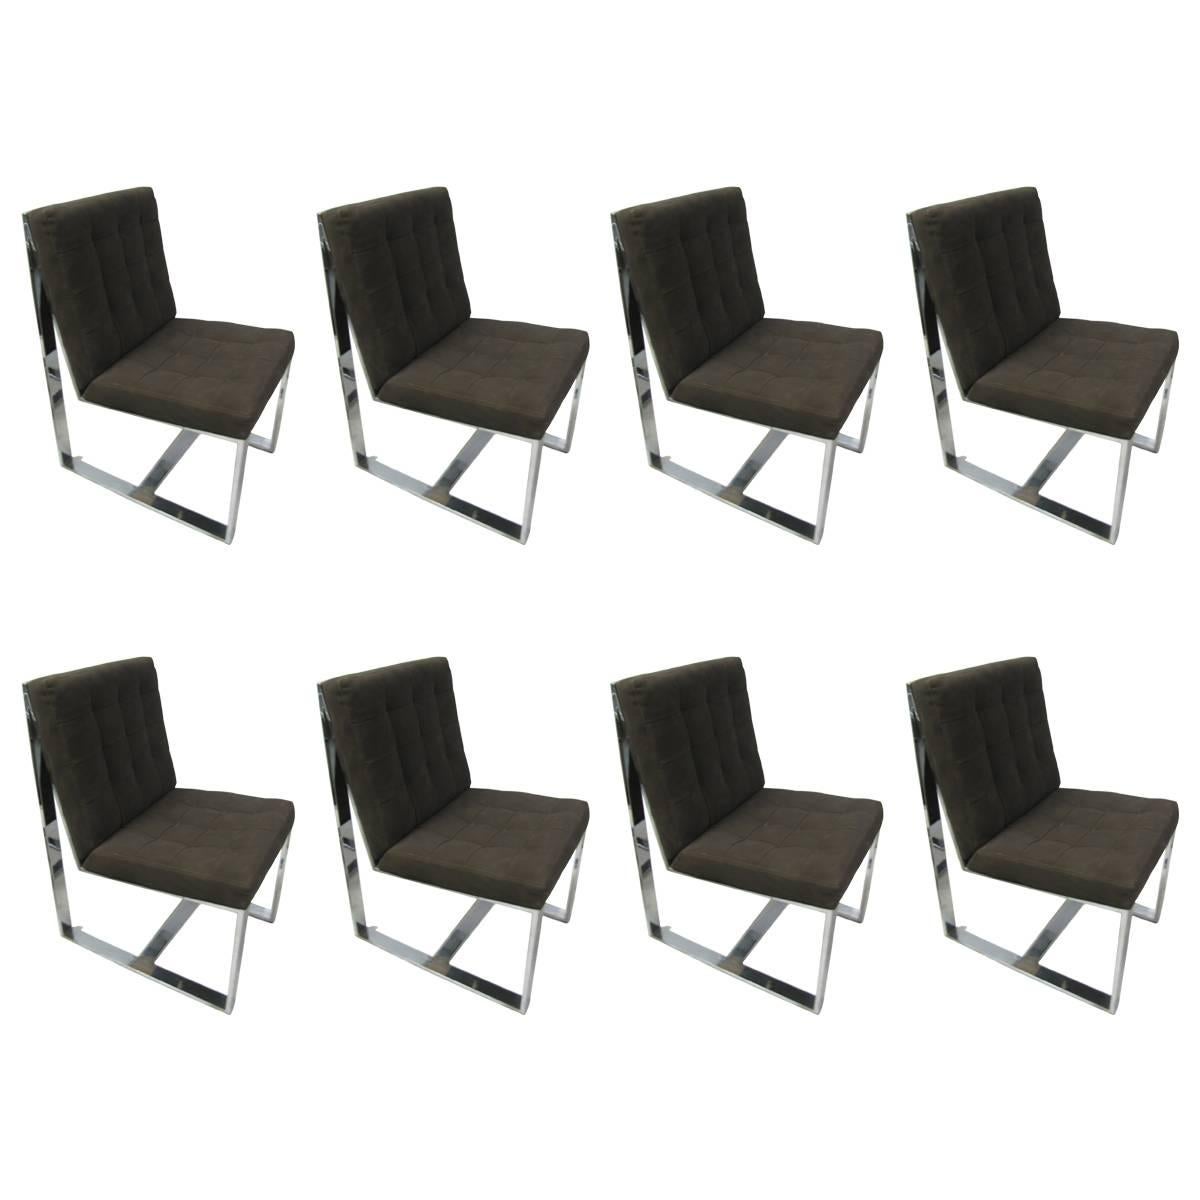 Set of Eight Mid-Century Modern Milo Baughman Cantilevered Dining Chairs